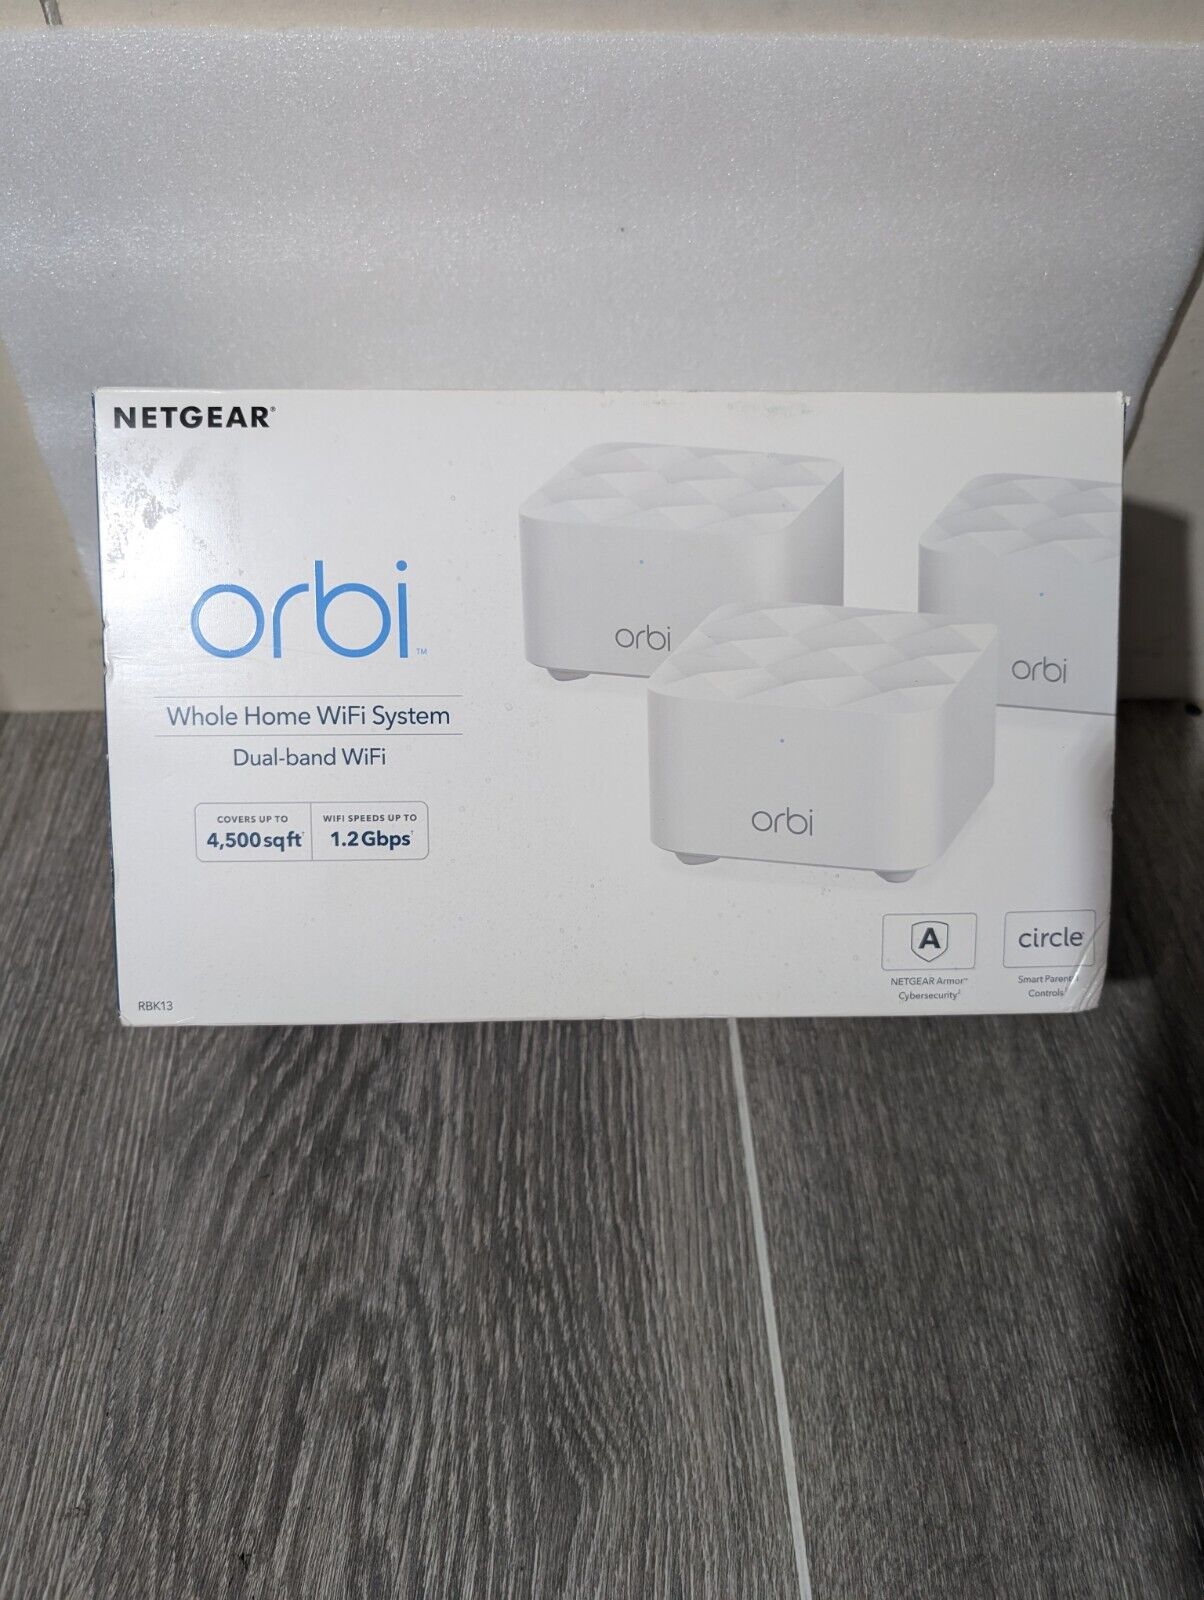 NETGEAR Orbi AC1200 Whole Home Mesh WiFi System Dual Band RBK13-100NAS Router 